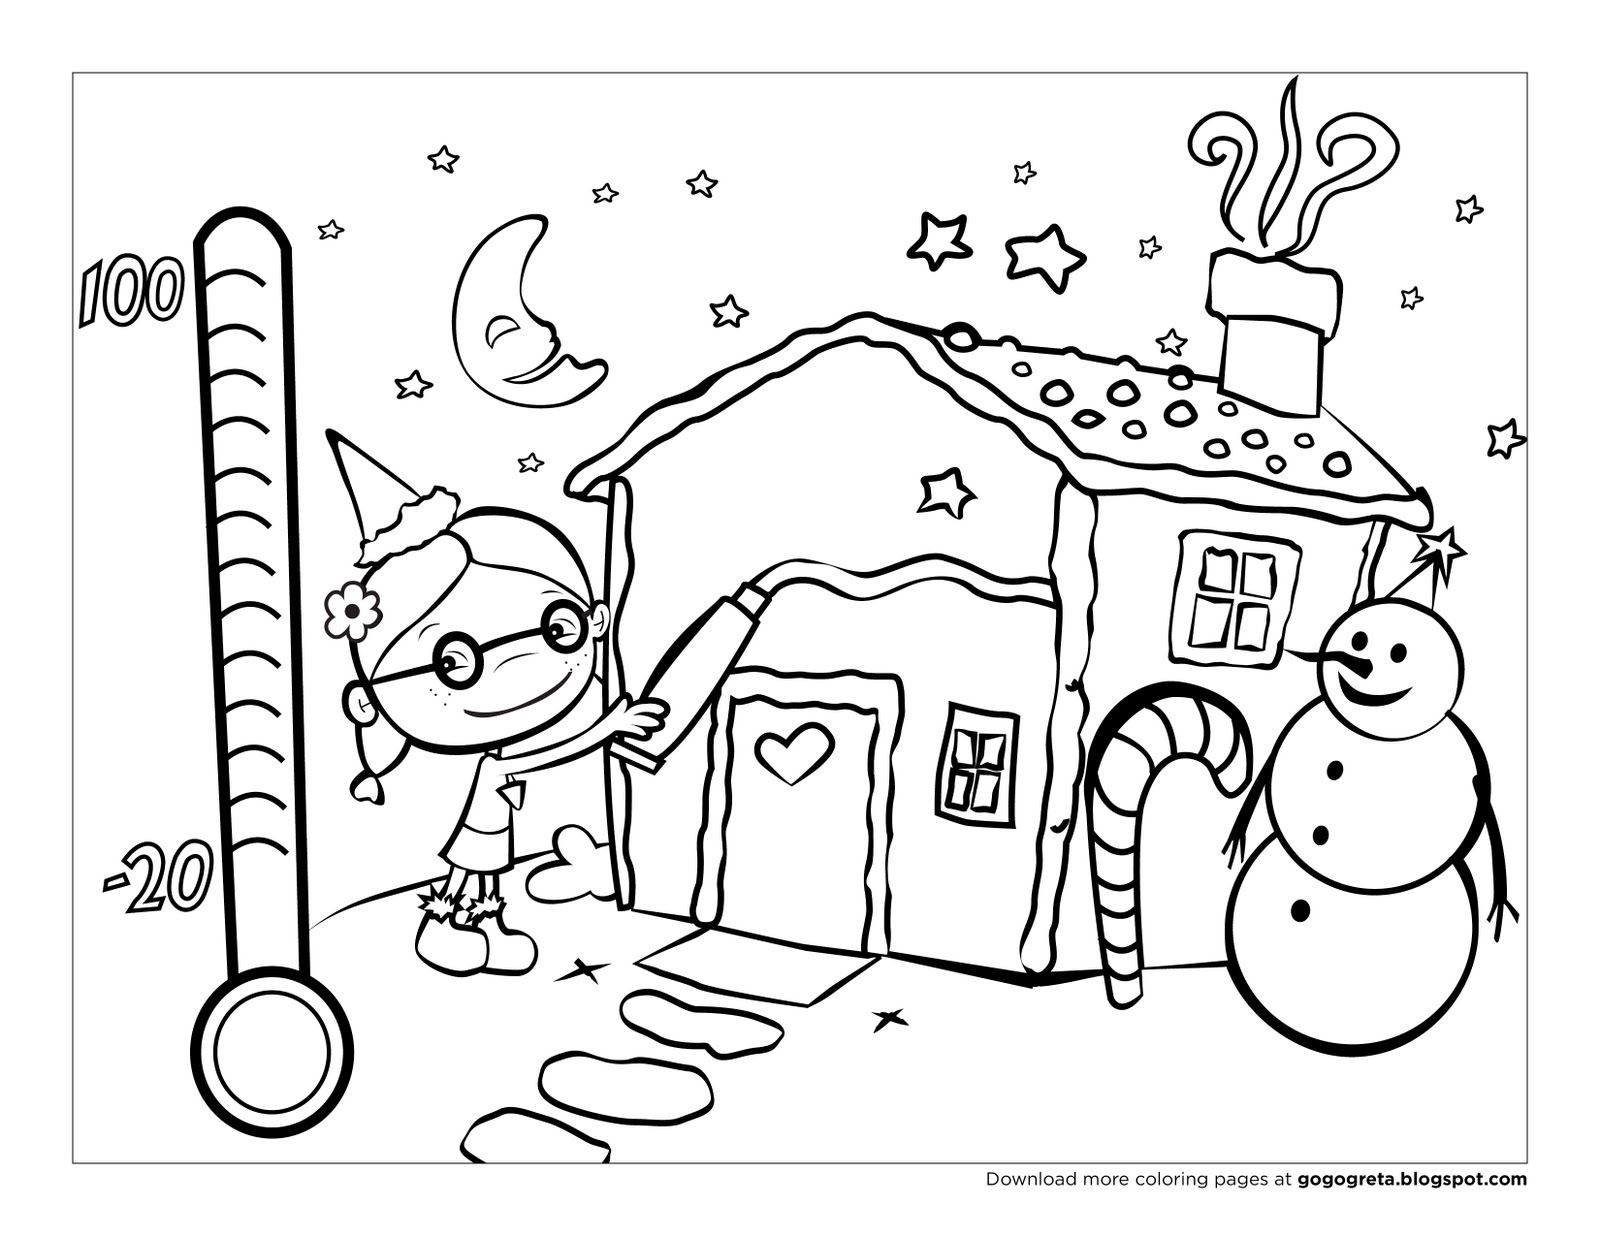 Coloring Sheetgebob House Page Funny Wallpaper Quotesgebob_house_coloring_page Pages Free To Print